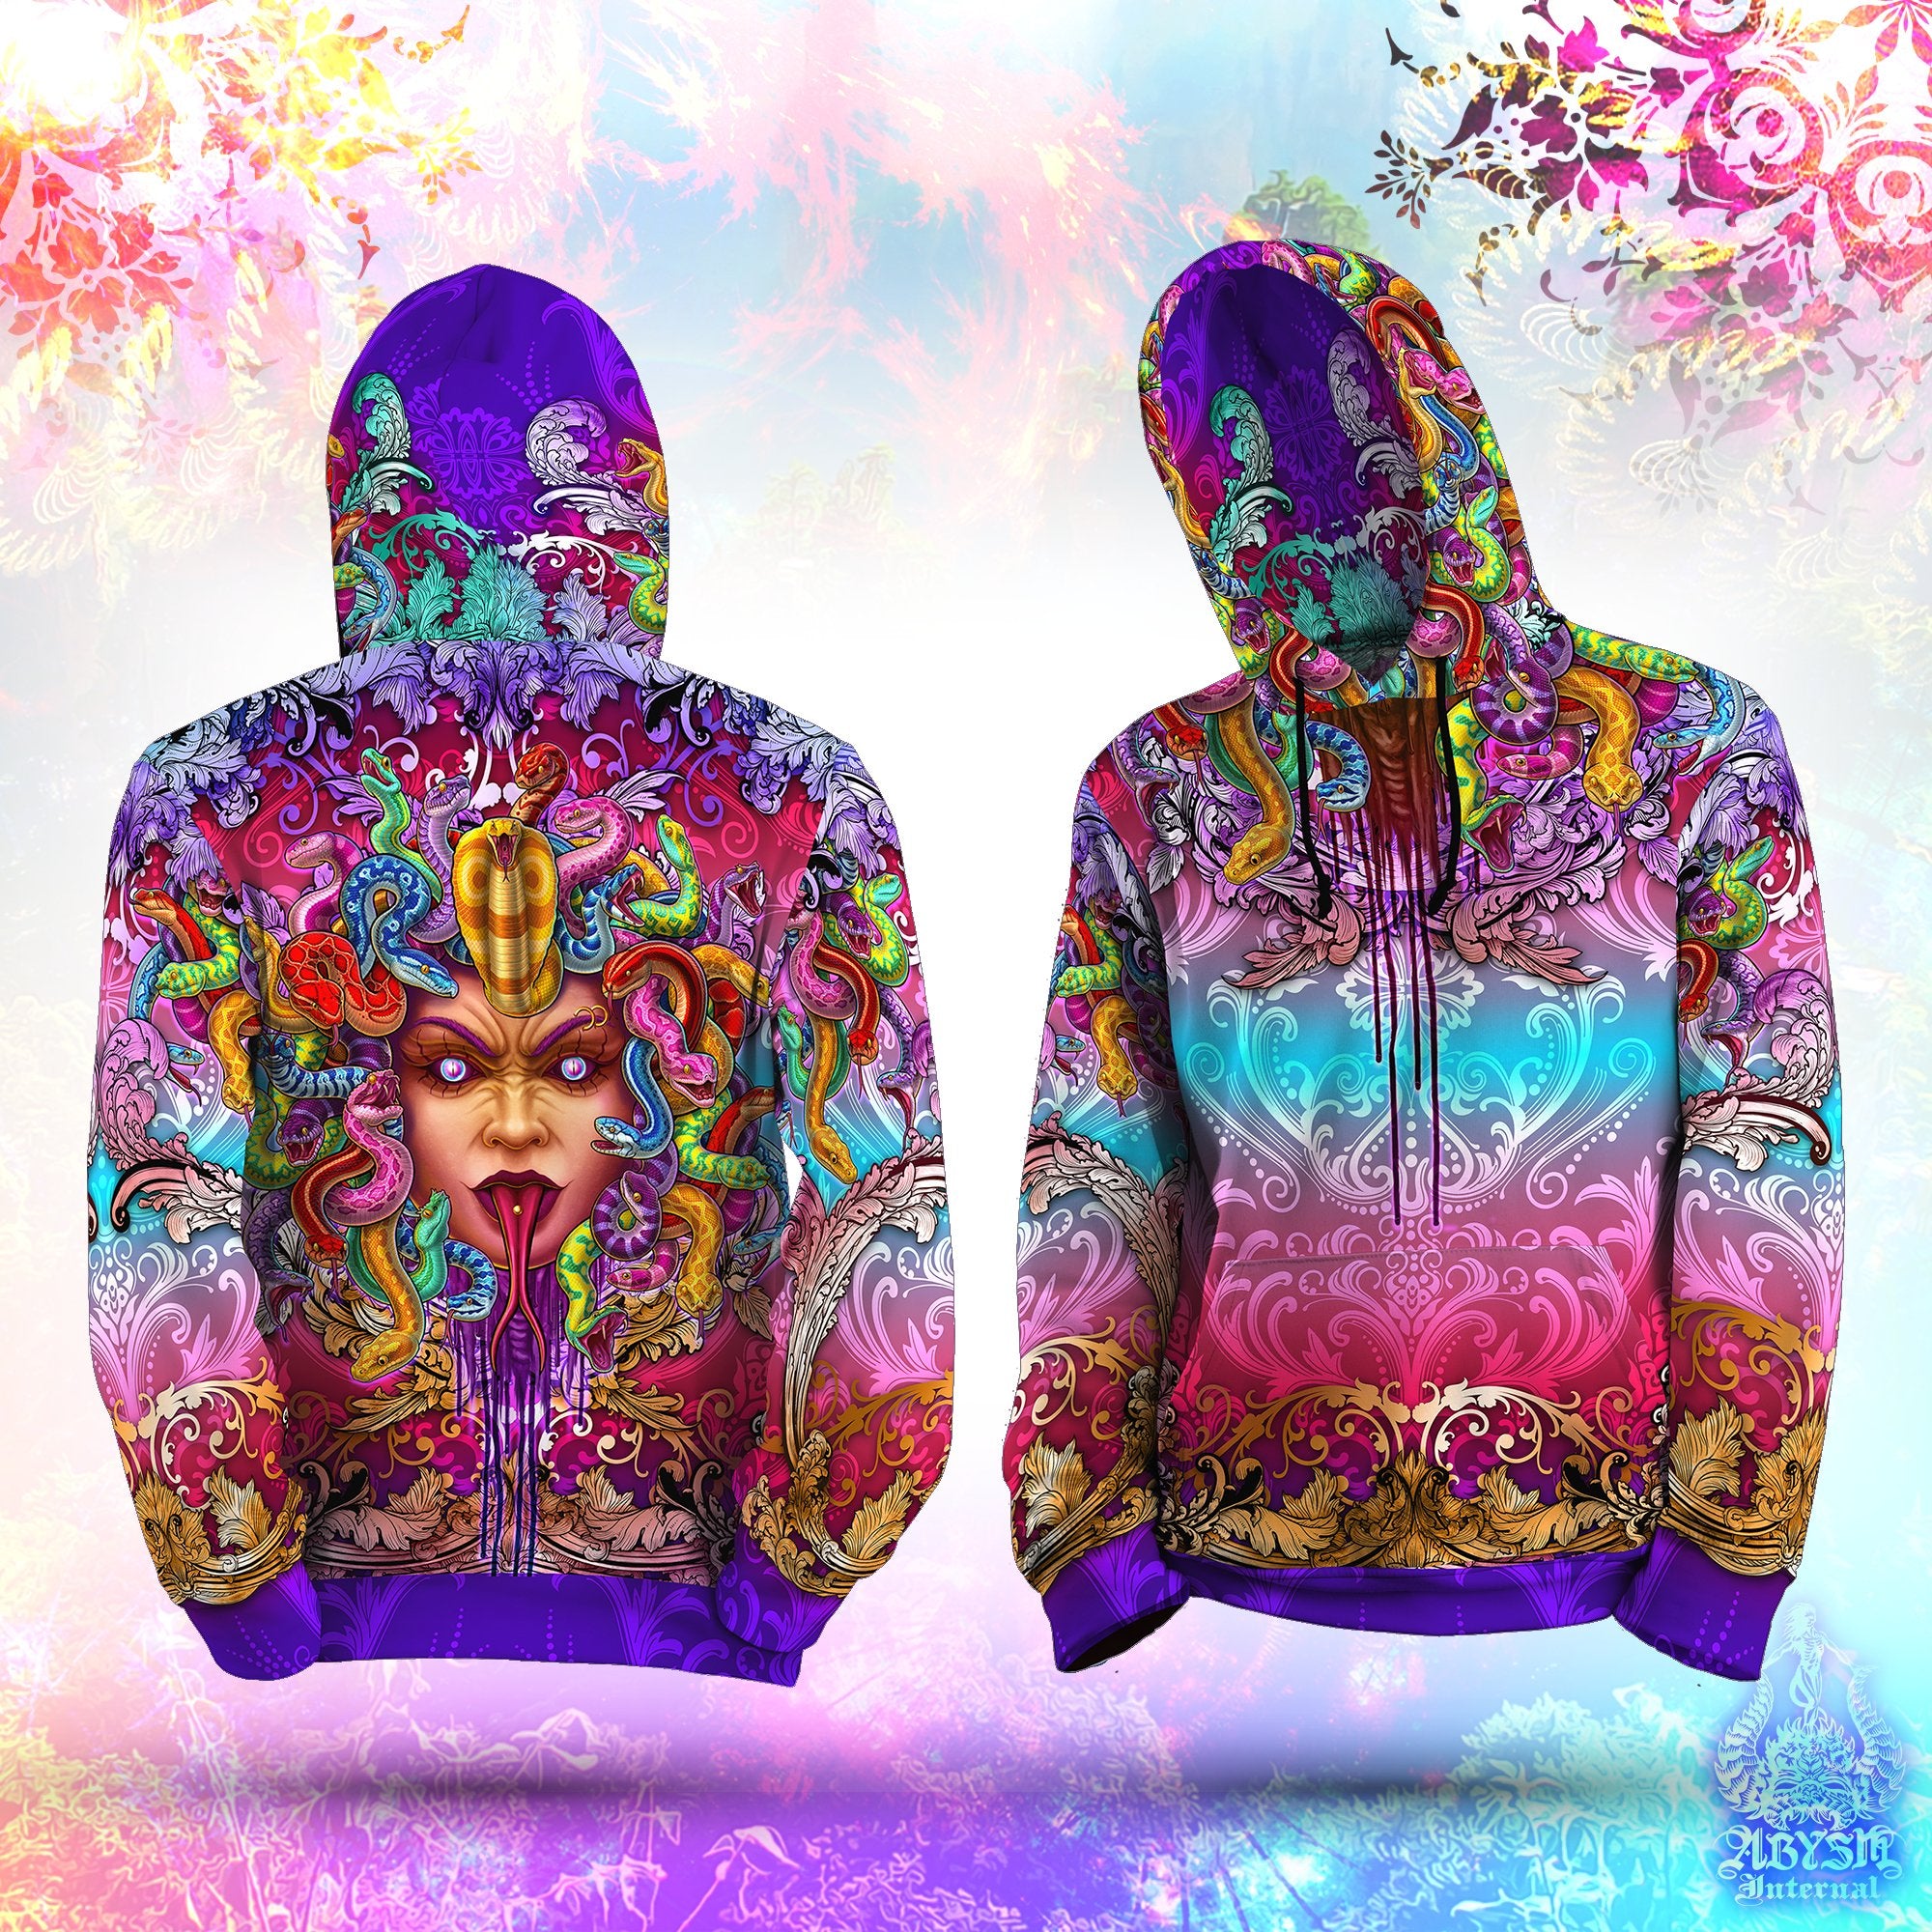 Trippy Hoodie, Rave Outfit, Party Pullover, Psychedelic Streetwear, Psy Festival Sweater, Alternative Clothing, Unisex - Medusa, 2 Faces - Abysm Internal